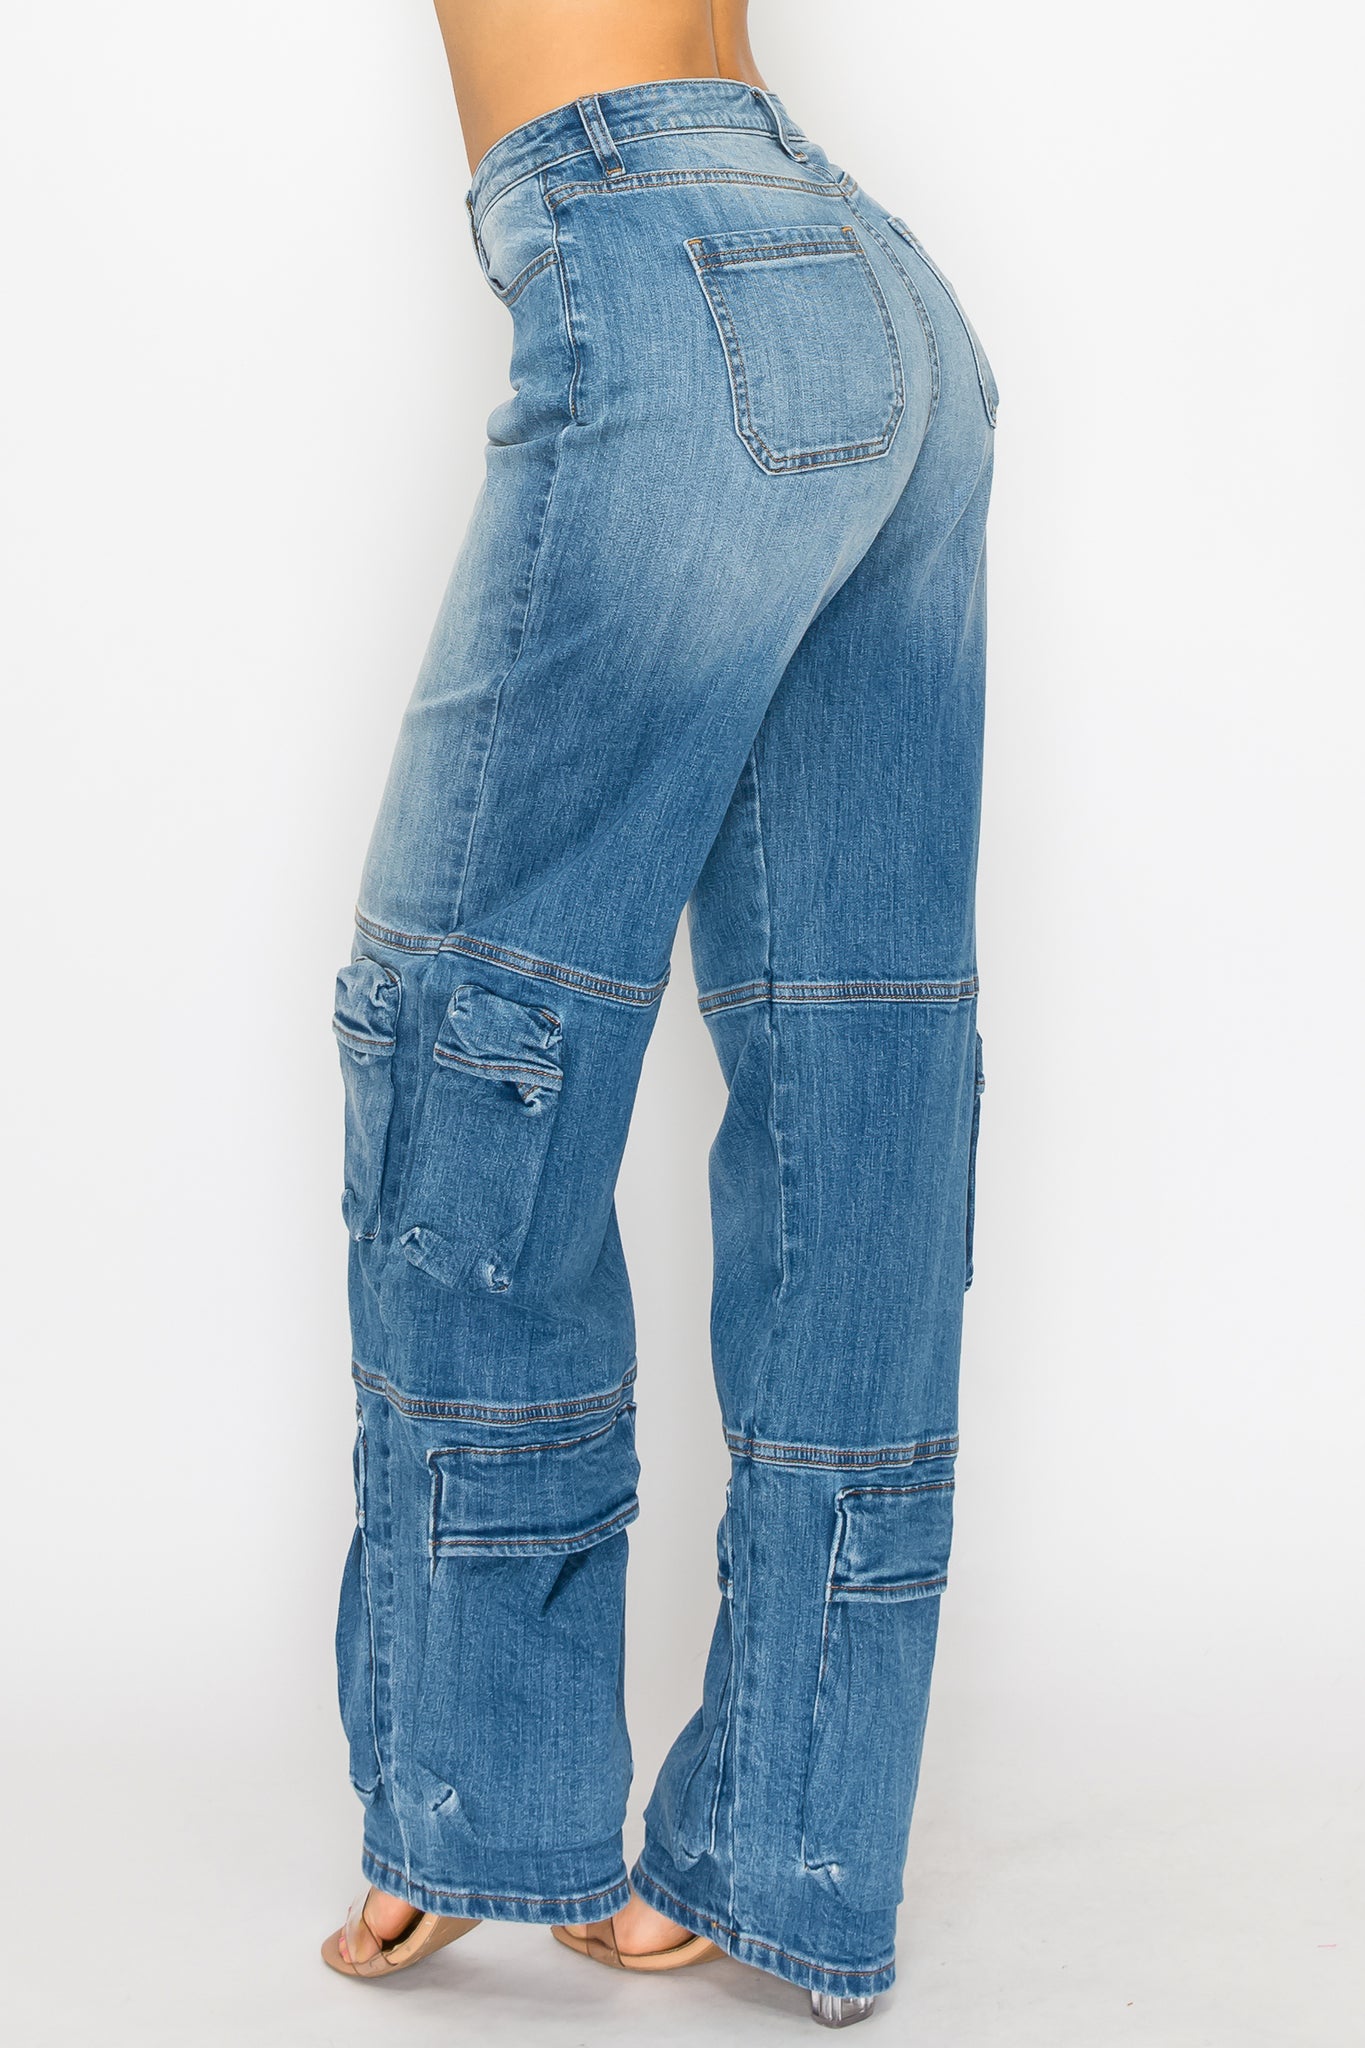 Holland Jeans Denim Tall | Denim jeans ripped, Friday outfit, Ripped denim